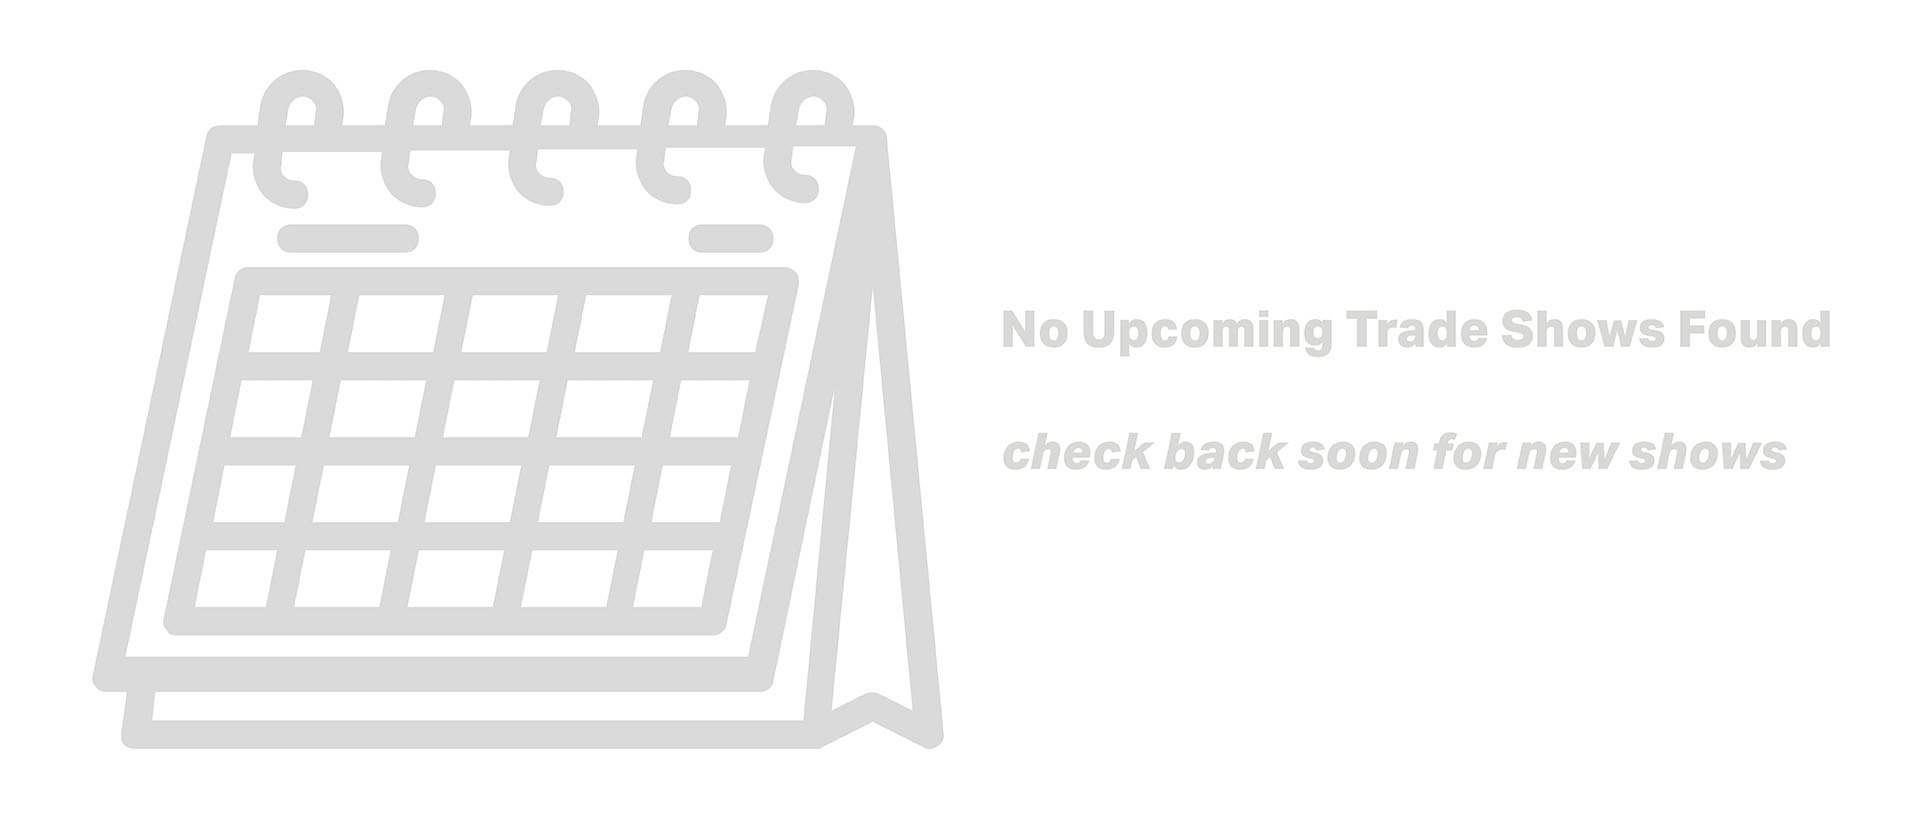 A gray calendar icon with the text No Upcoming Trade Shows Found, check back soon for new shows.